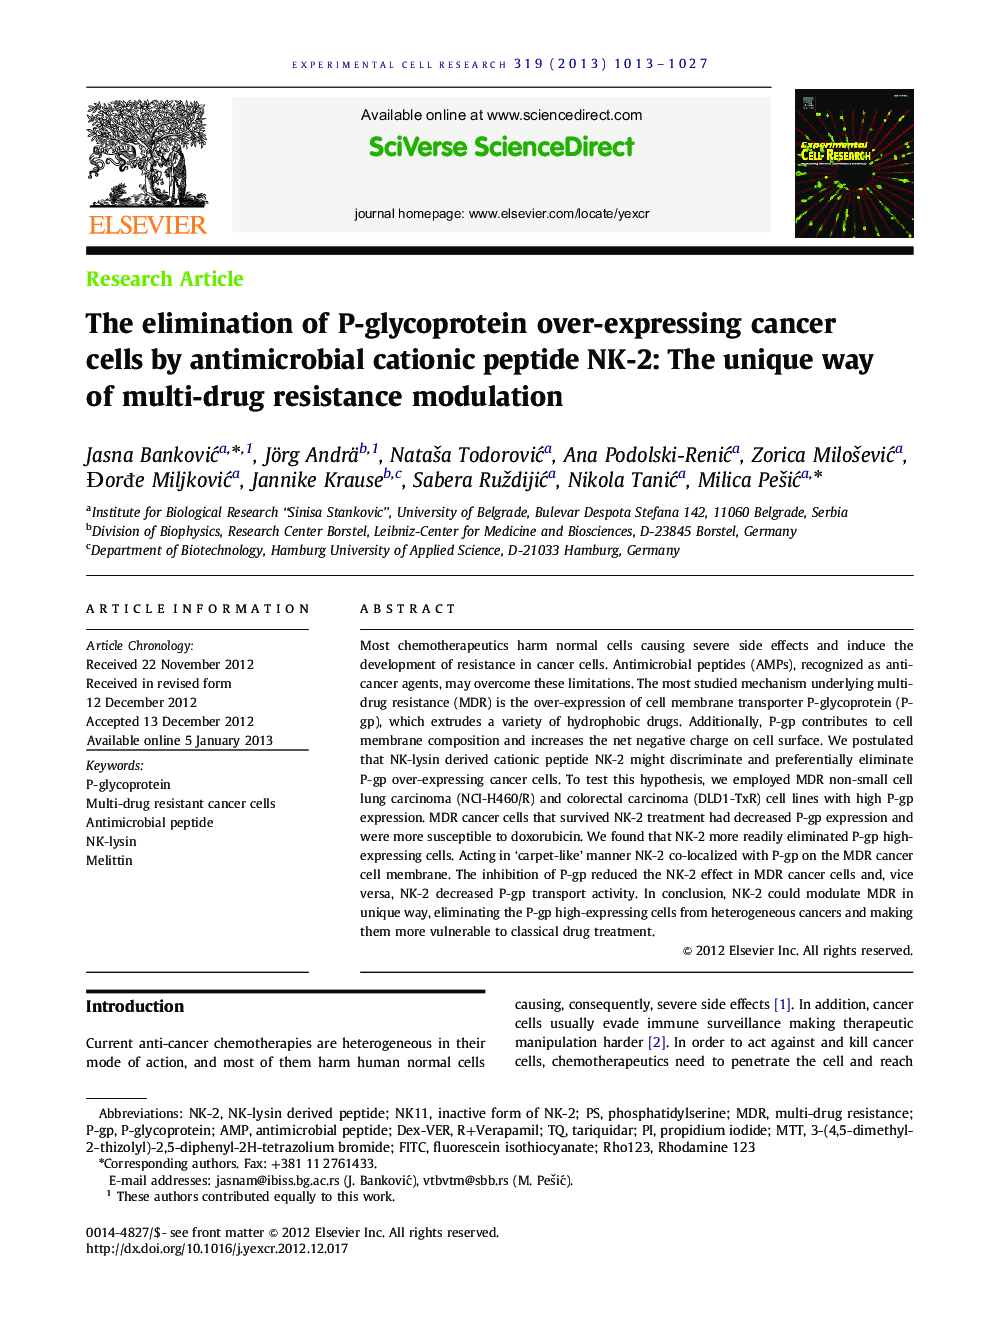 The elimination of P-glycoprotein over-expressing cancer cells by antimicrobial cationic peptide NK-2: The unique way of multi-drug resistance modulation